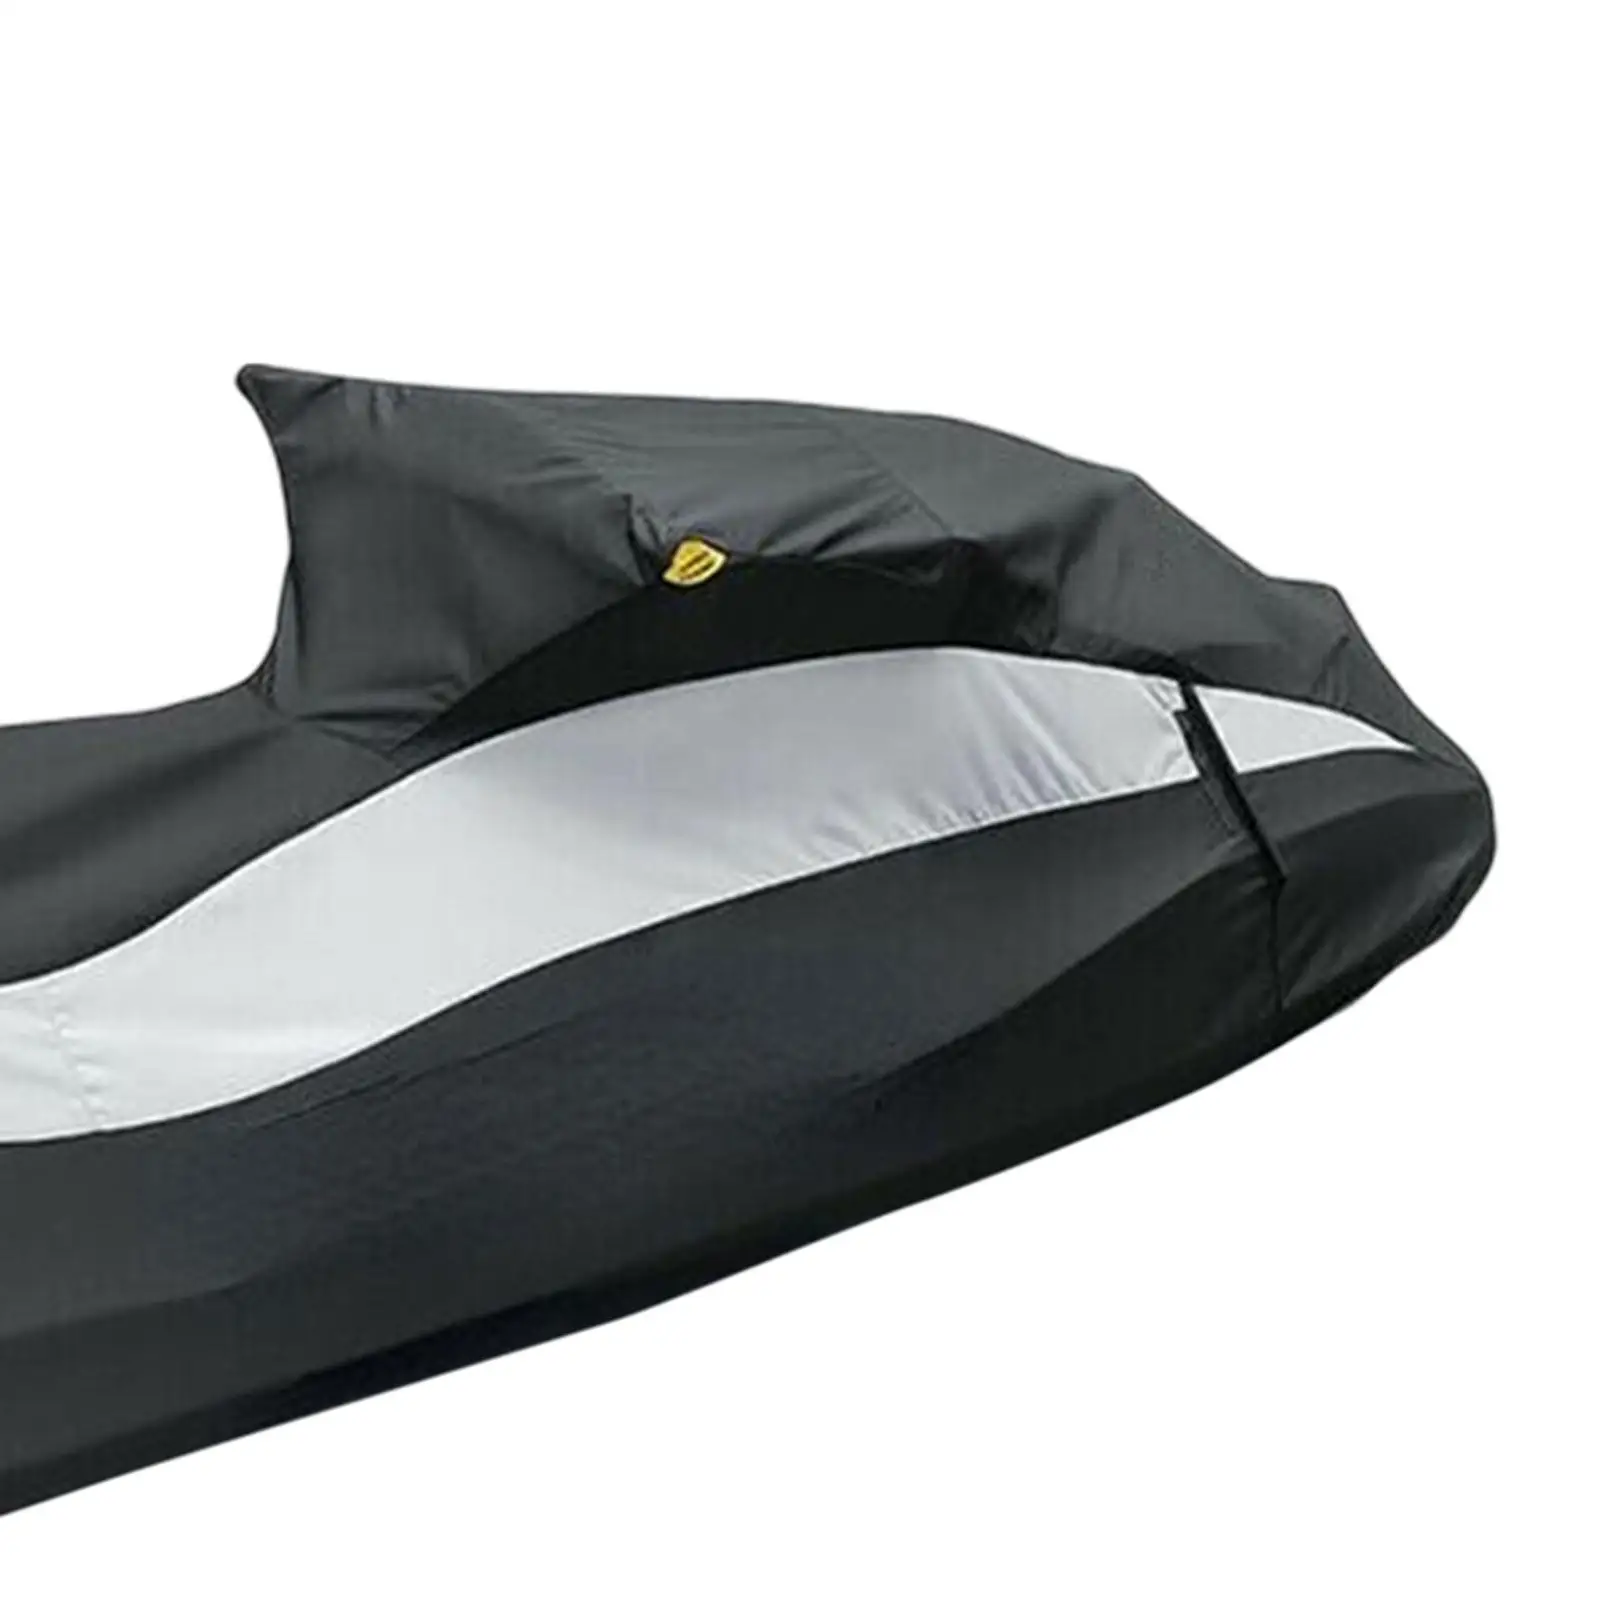 Jet Ski Watercraft Cover 295100722 Anti Scratch Soft Inner Lining Replacement Waterproof Boat Cover for GTS GTI GTS Rental